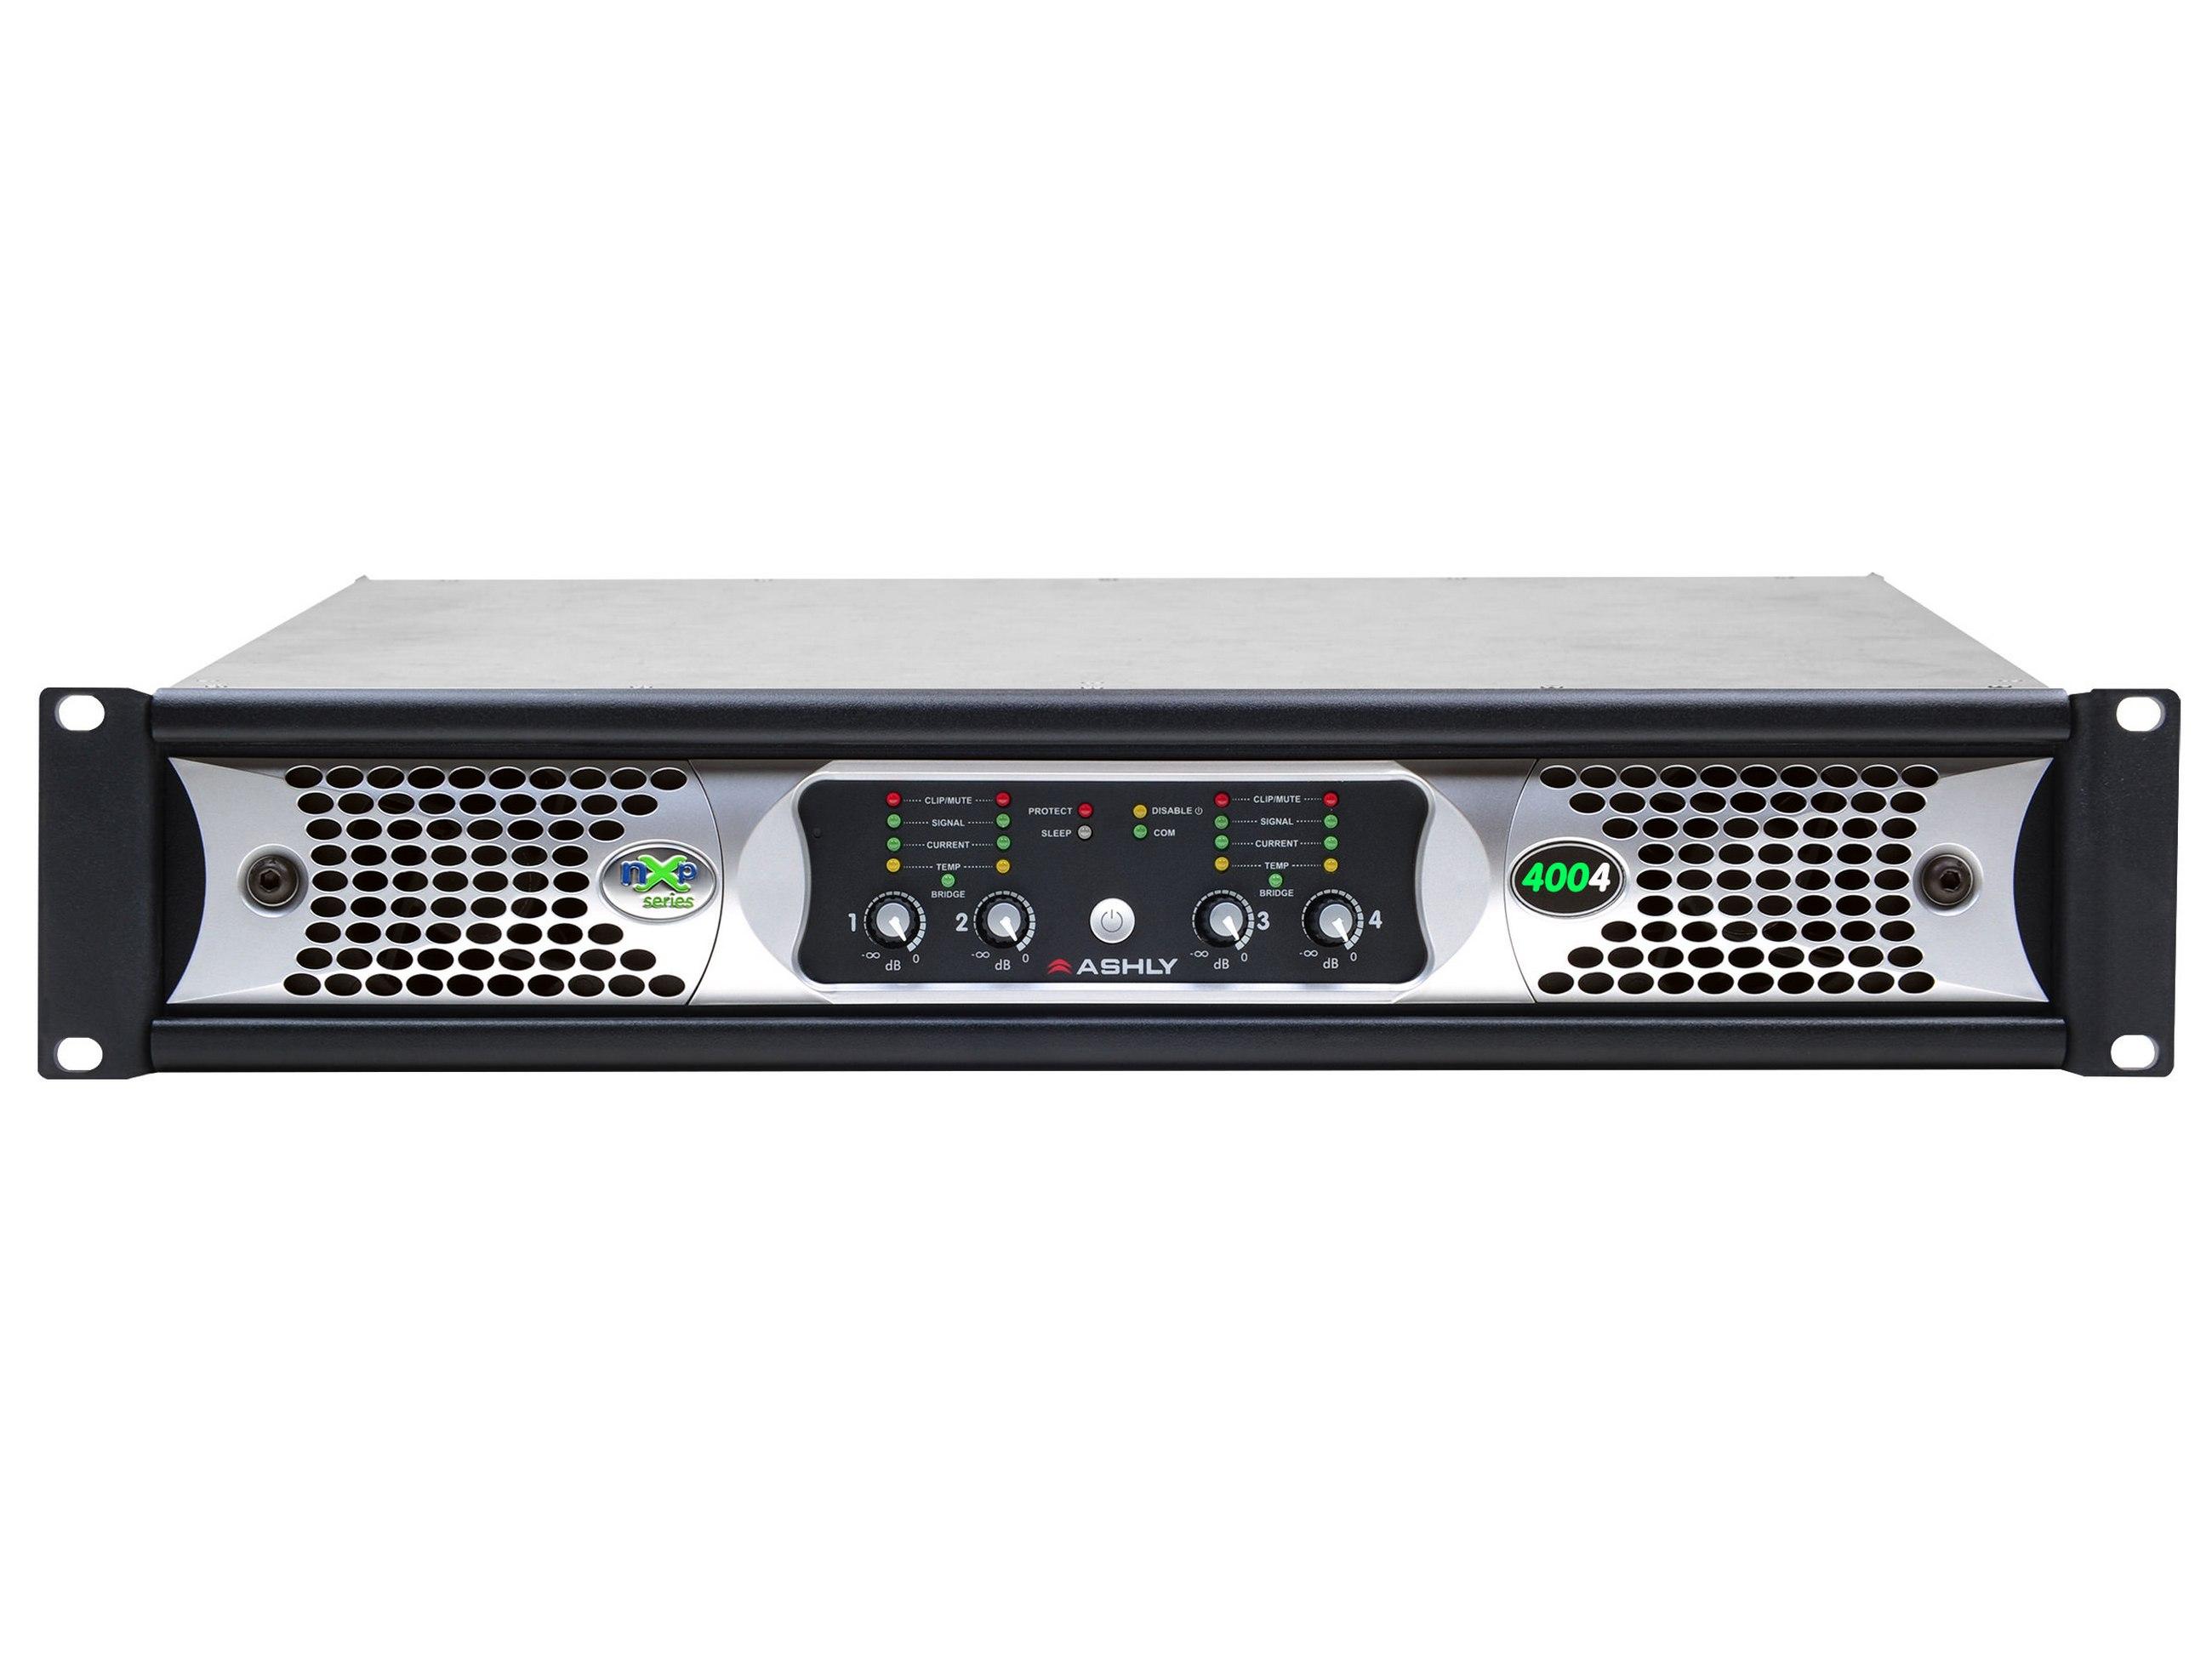 nXp4004 Network Power Amplifier 4 x 400 Watts/2 Ohms with Protea DSP by Ashly